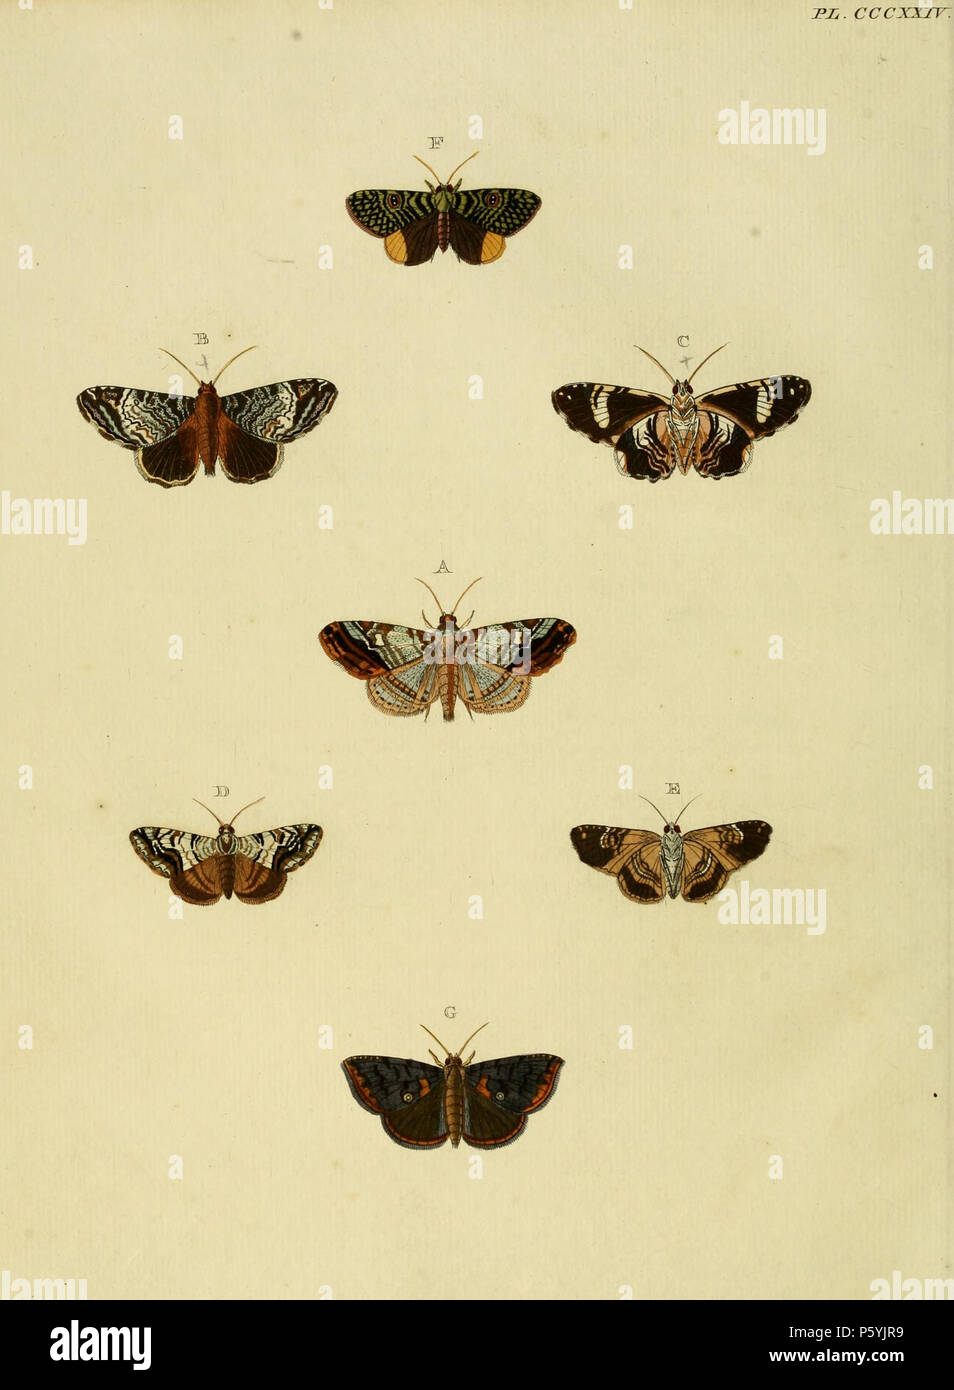 N/A. Plate CCCXXIV Warning: some taxa/names may be misidentified/misapplied or placed in a different genus.  A: '(Phalaena) Euristea' ( = Metria euristea (Stoll, 1780), see NHM, Global Lepidoptera Names Index).  B, C (), D, E (): '(Phalaena) Damonia' ( = Acolasis capensis (Cramer, 1777), see NHM, Global Lepidoptera Names Index).  Also on plate 167 C.  F: '(Phalaena) Oculata' ( = Glenopteris oculifera Hübner, [1821], see NHM, Global Lepidoptera Names Index). Photos at Barcode of Life.  G: '(Phalaena) Ancea' ( = Dyomyx ancea (Stoll, 1780), iconotype, see NHM, Global Lepidoptera Names Index).  .  Stock Photo